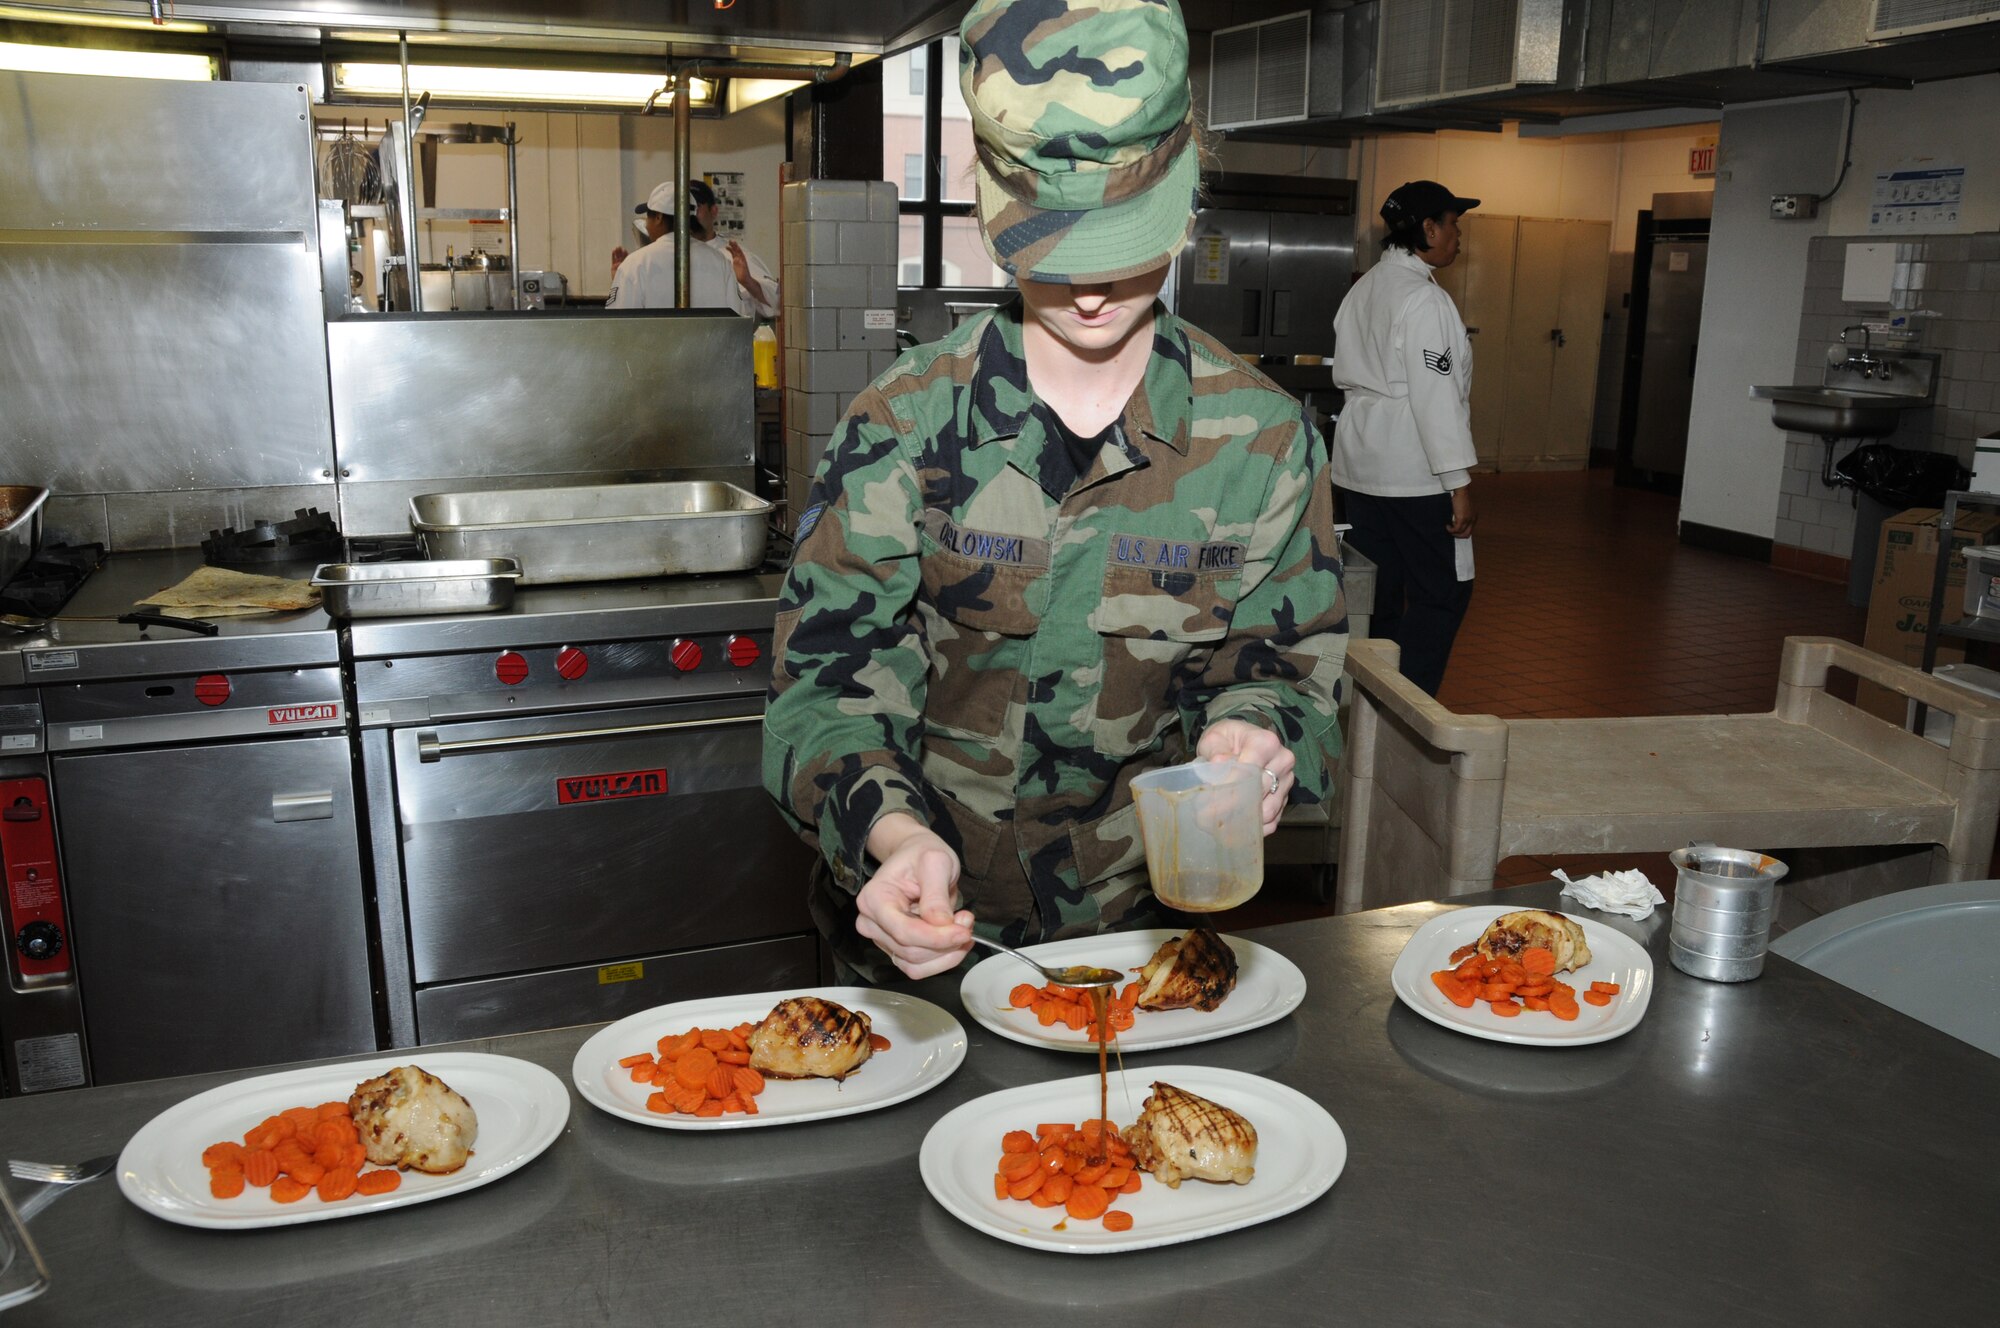 Senior Airmen Evelyn Orlowski from Team A prepares the plate for the judges. Team A's meal was Caramelized apple stuffed chicken breast with fontina and bing cherries served with glazed carrots. (U.S. Air Force photo/Staff Sgt. Peter Dean)